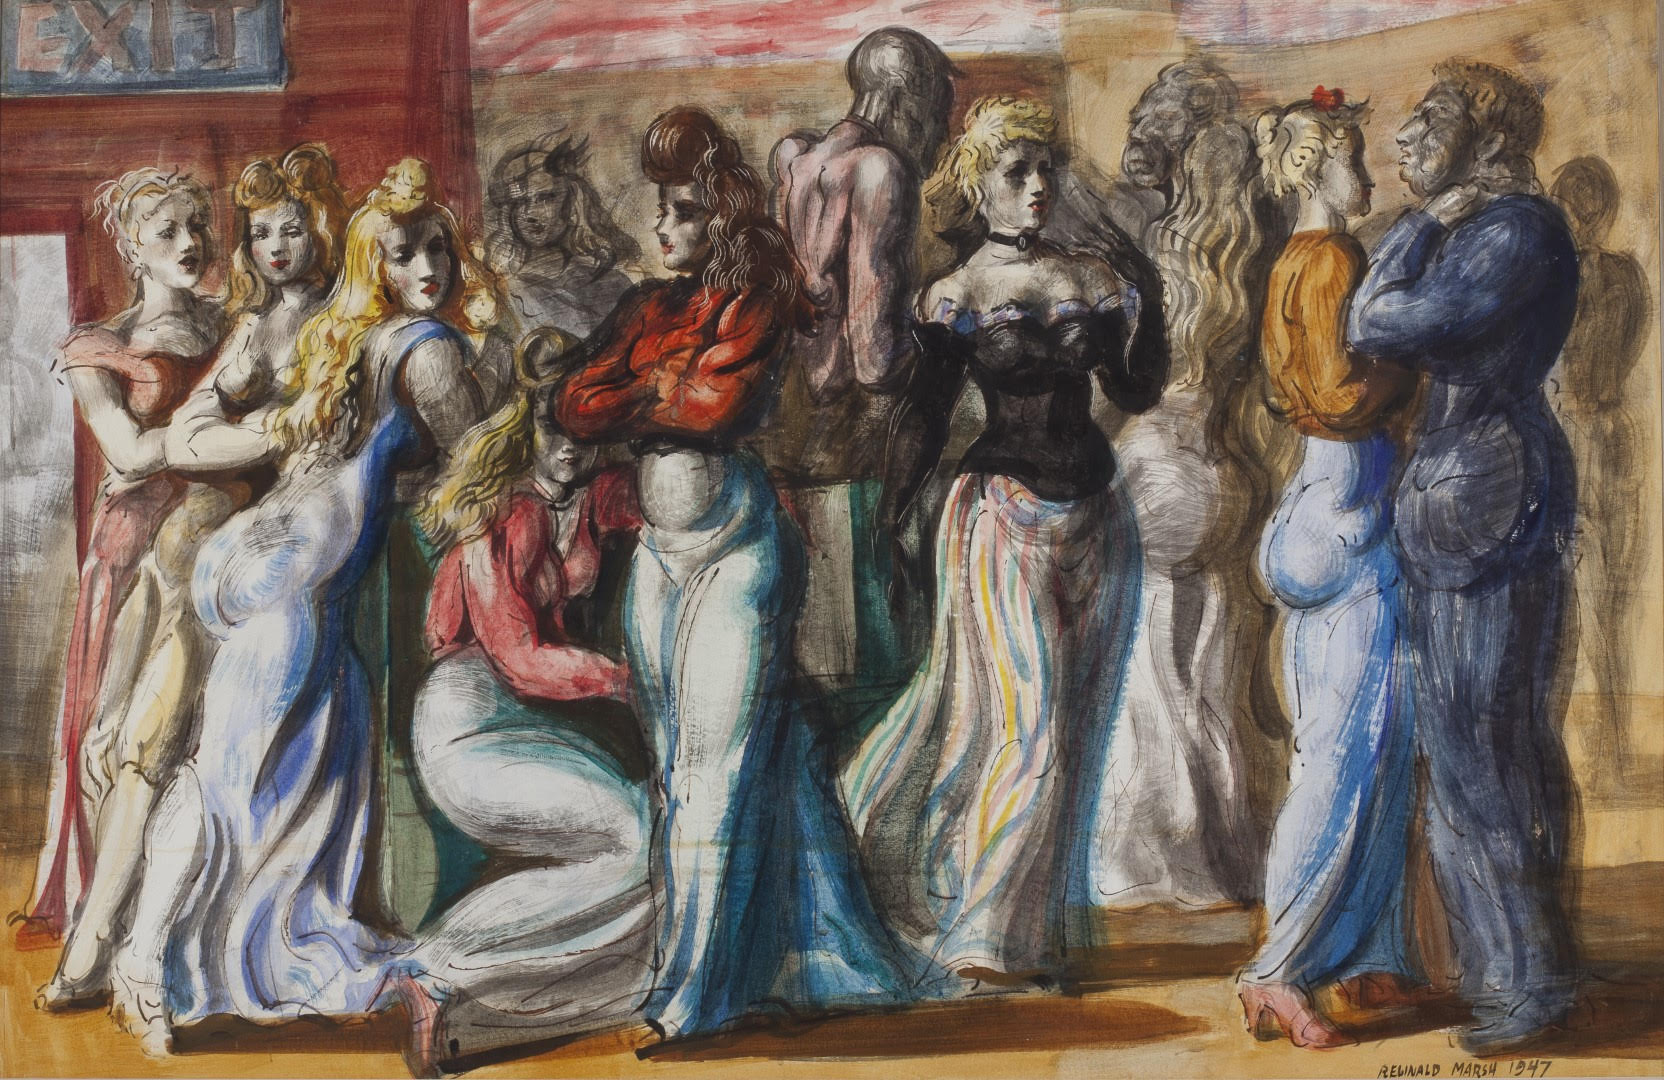 This bright watercolor displays 8 woman and 3 men gathering in the foreground. The women are dressed in nice outfits, with fancy updos. There is a clear emphasis on the curves of the women as they dance around this painting with energy.